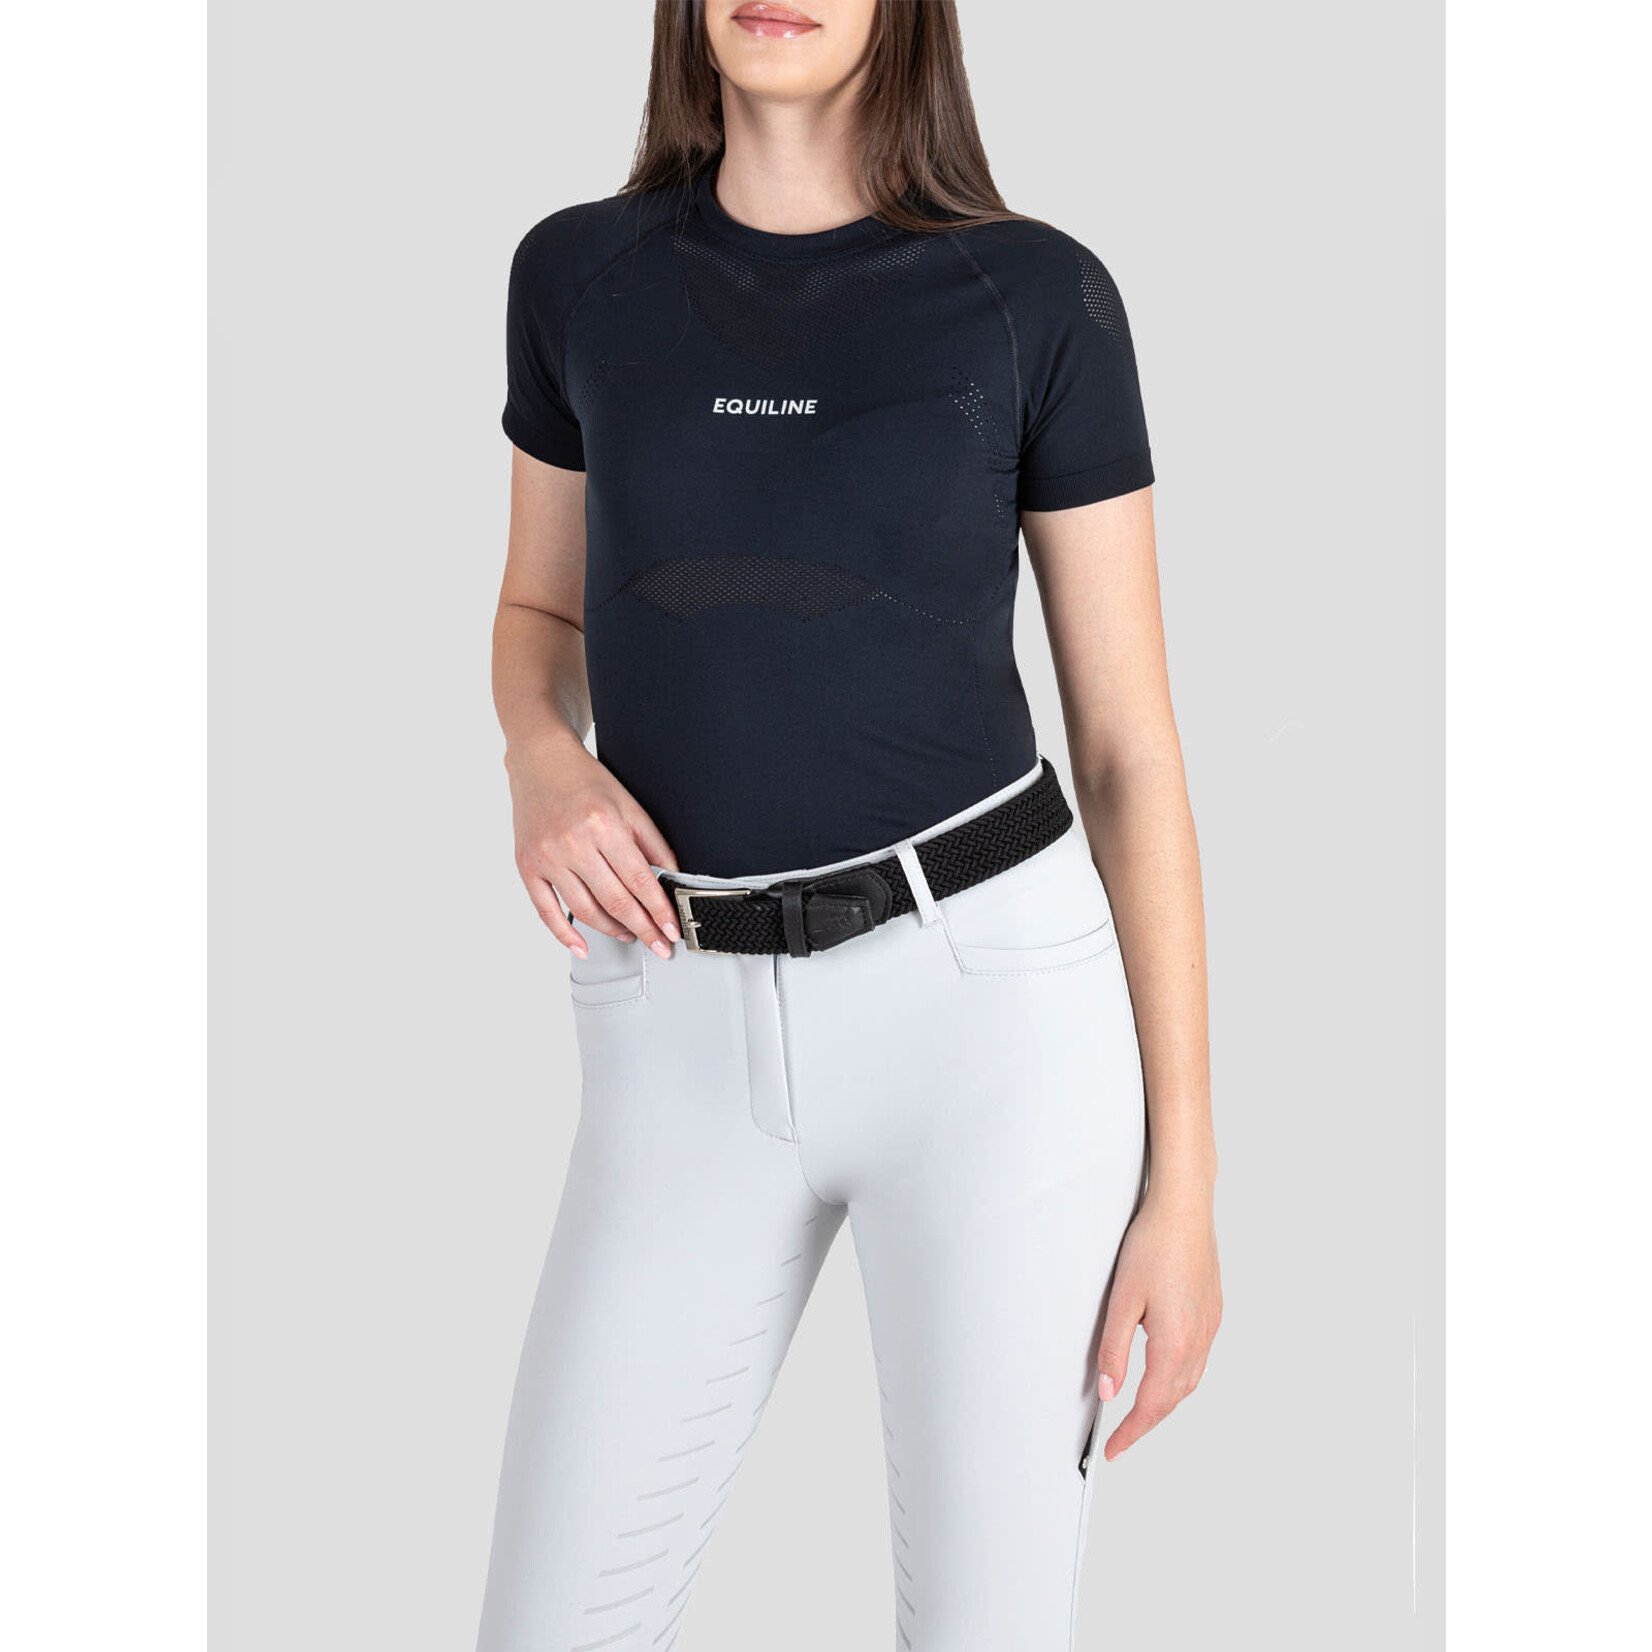 Equiline Equiline Cianec S/S Women's Seamless T-Shirt